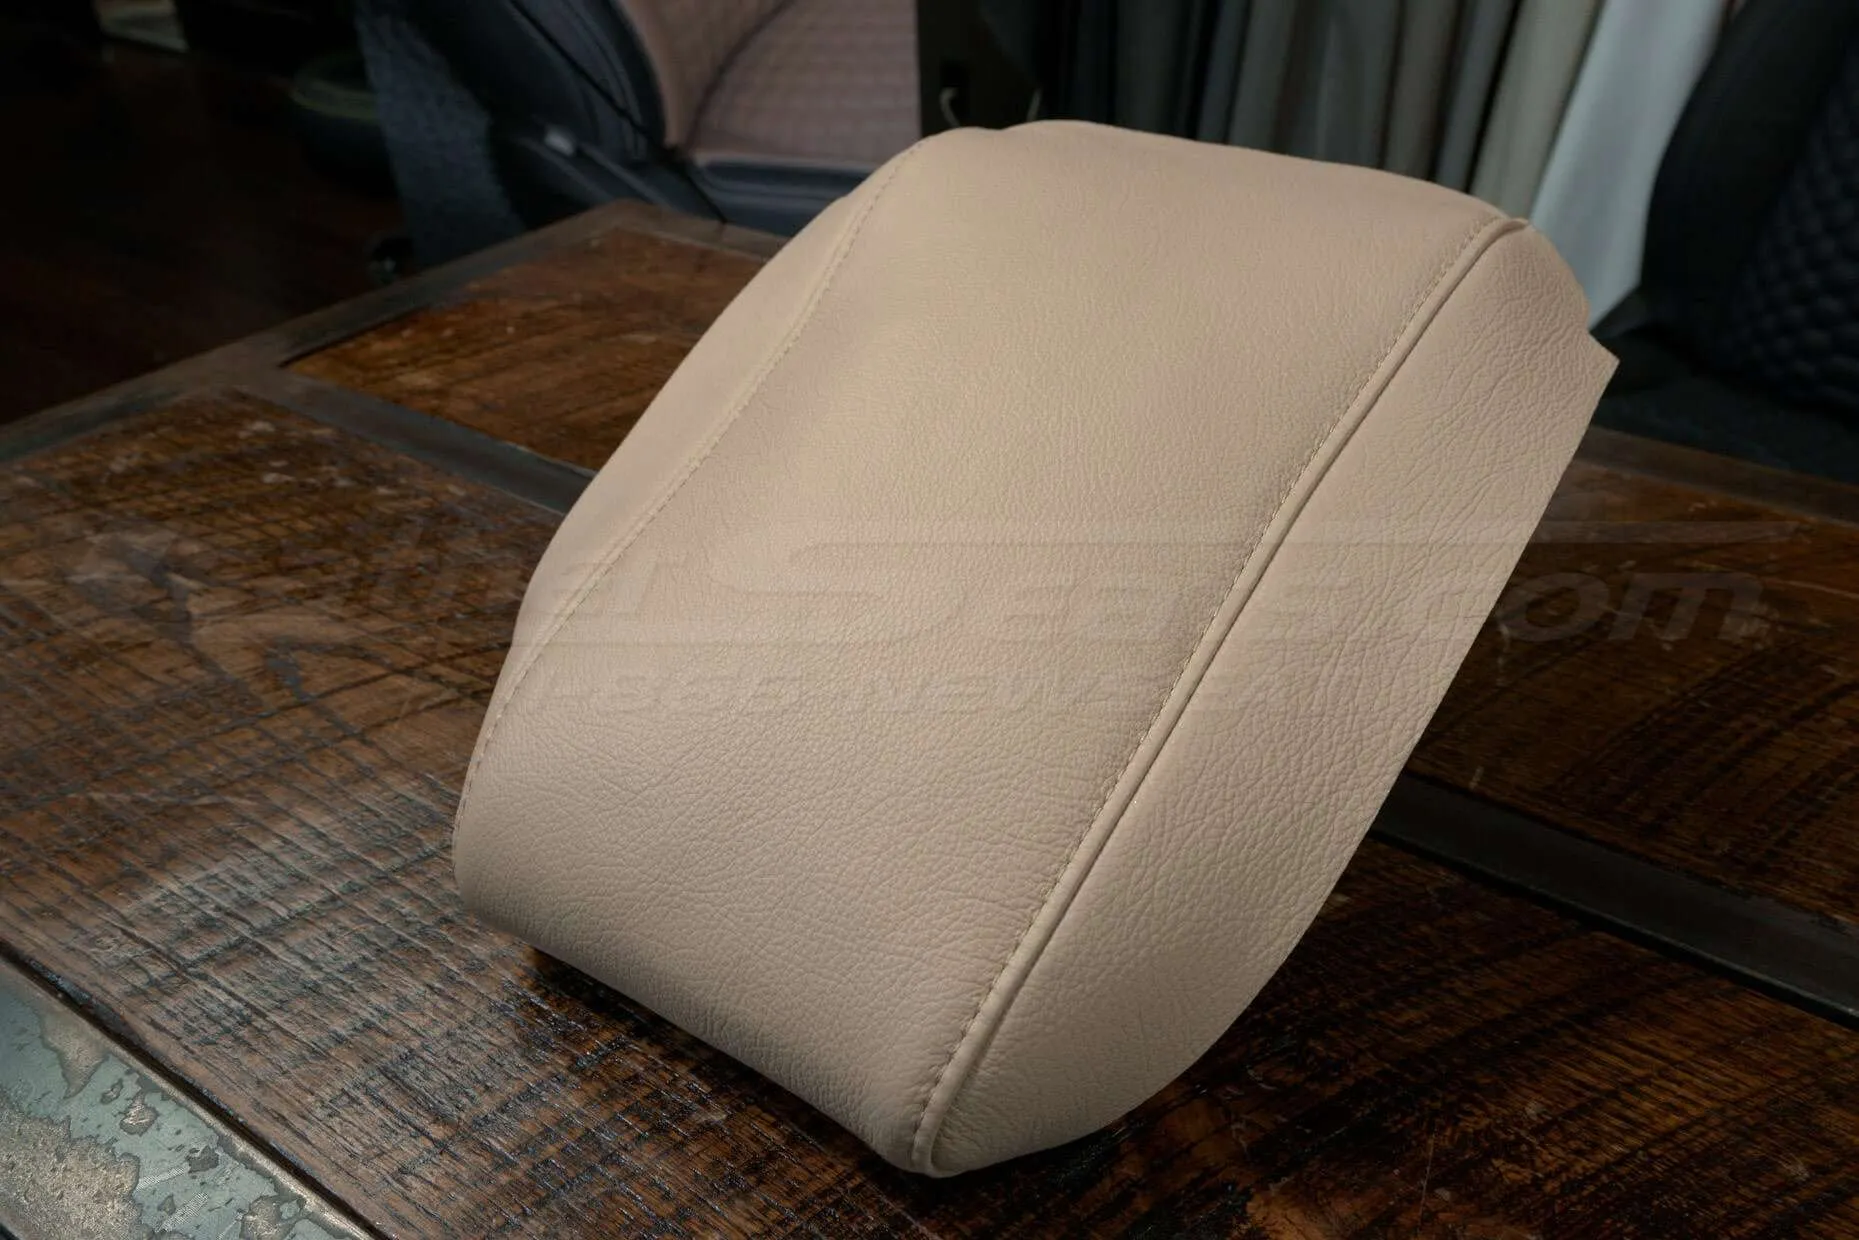 SAide view of leather console lid cover for lexus rx350